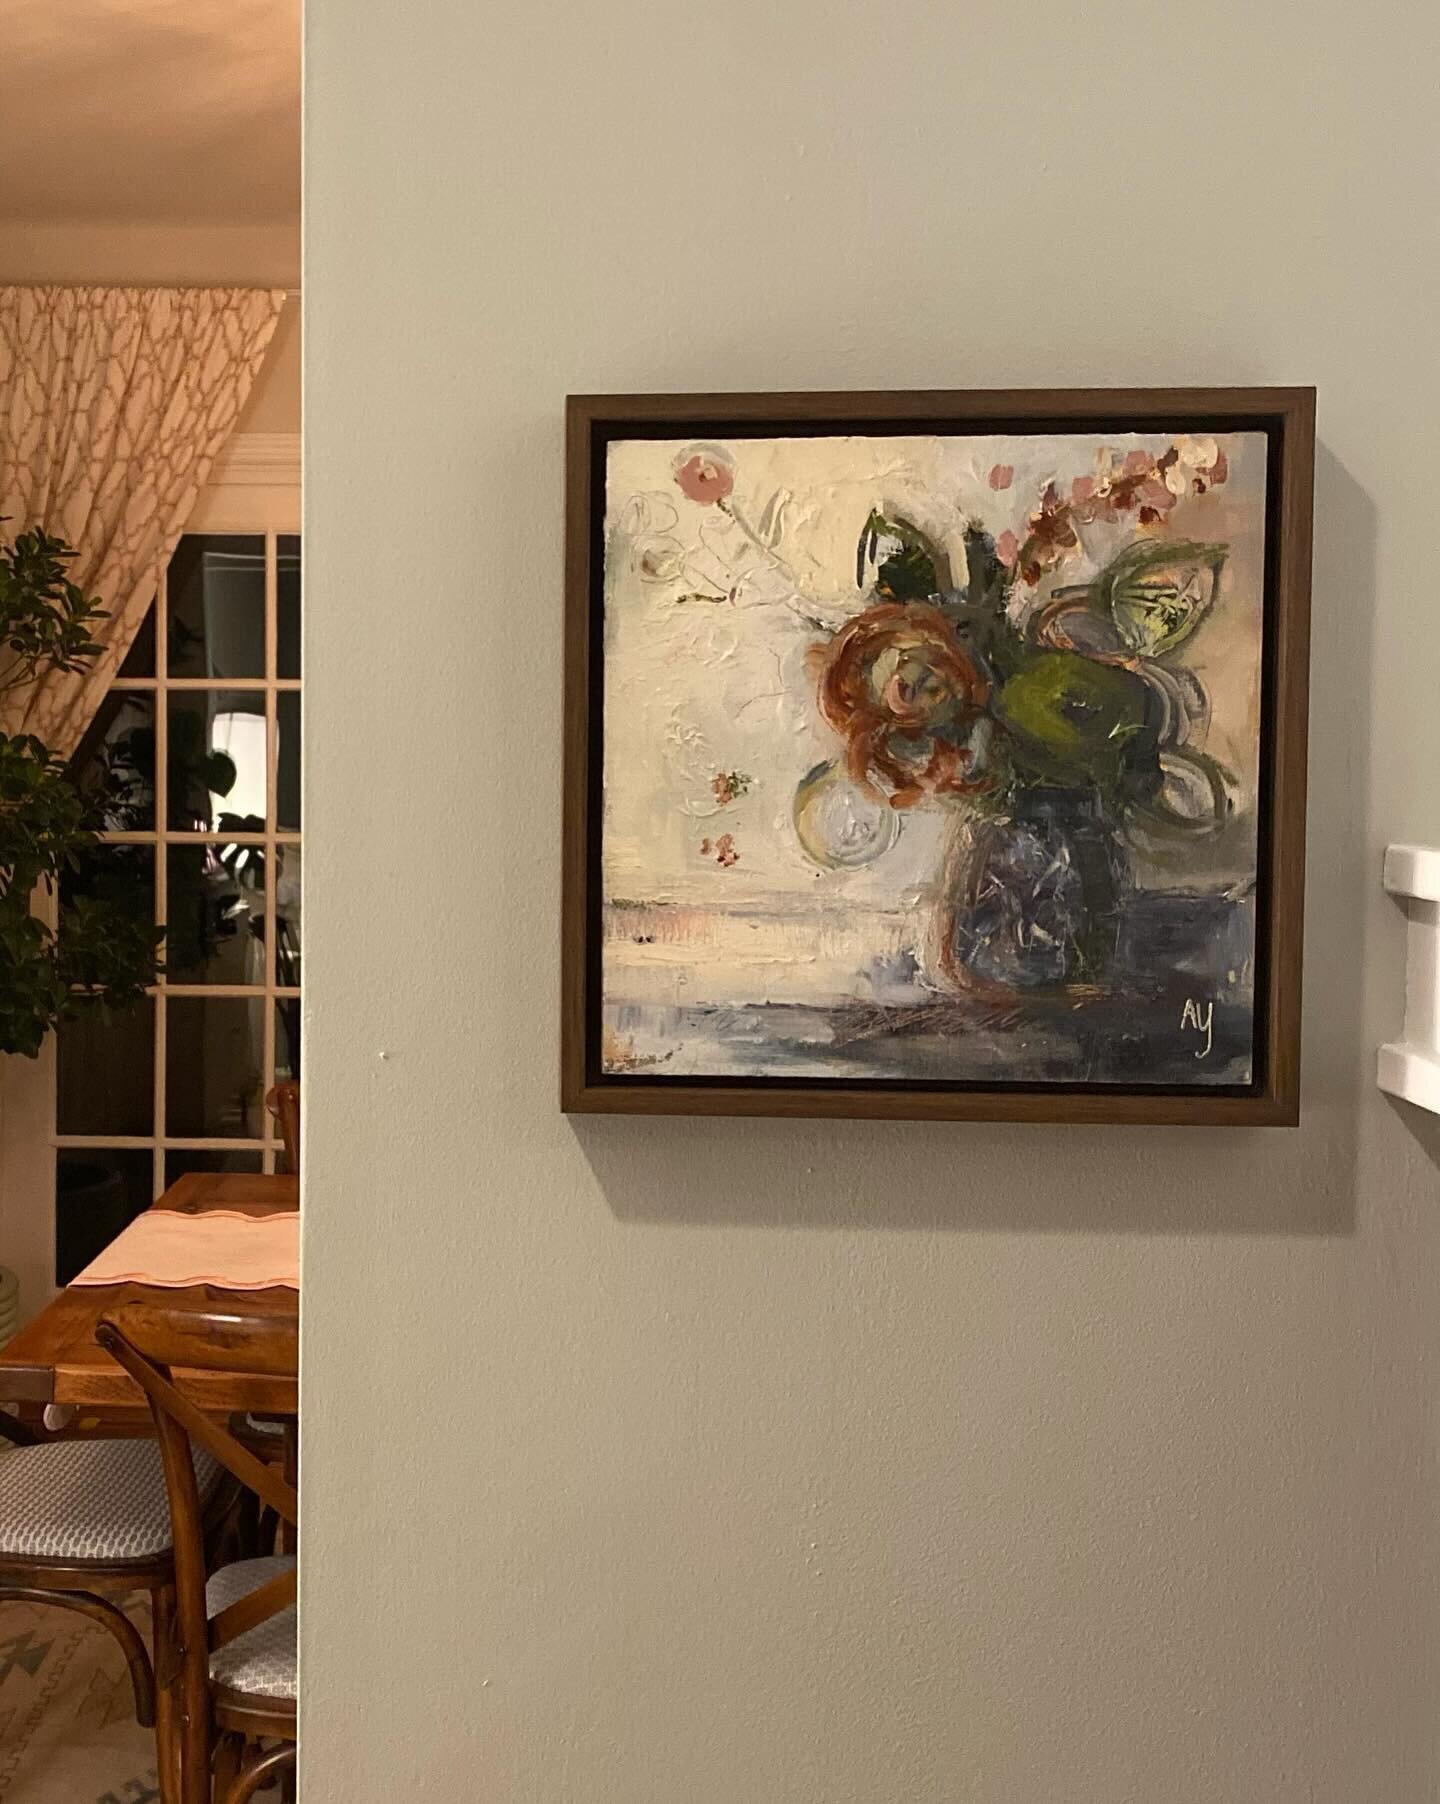 These two little cuties have found their forever home! Love the frames and the styling! Thank you @ksebelle! 
.
.
#njoilpainter #njartist #njstyle #floralpainting #florals #abstractflorals #abstractflowerpainting